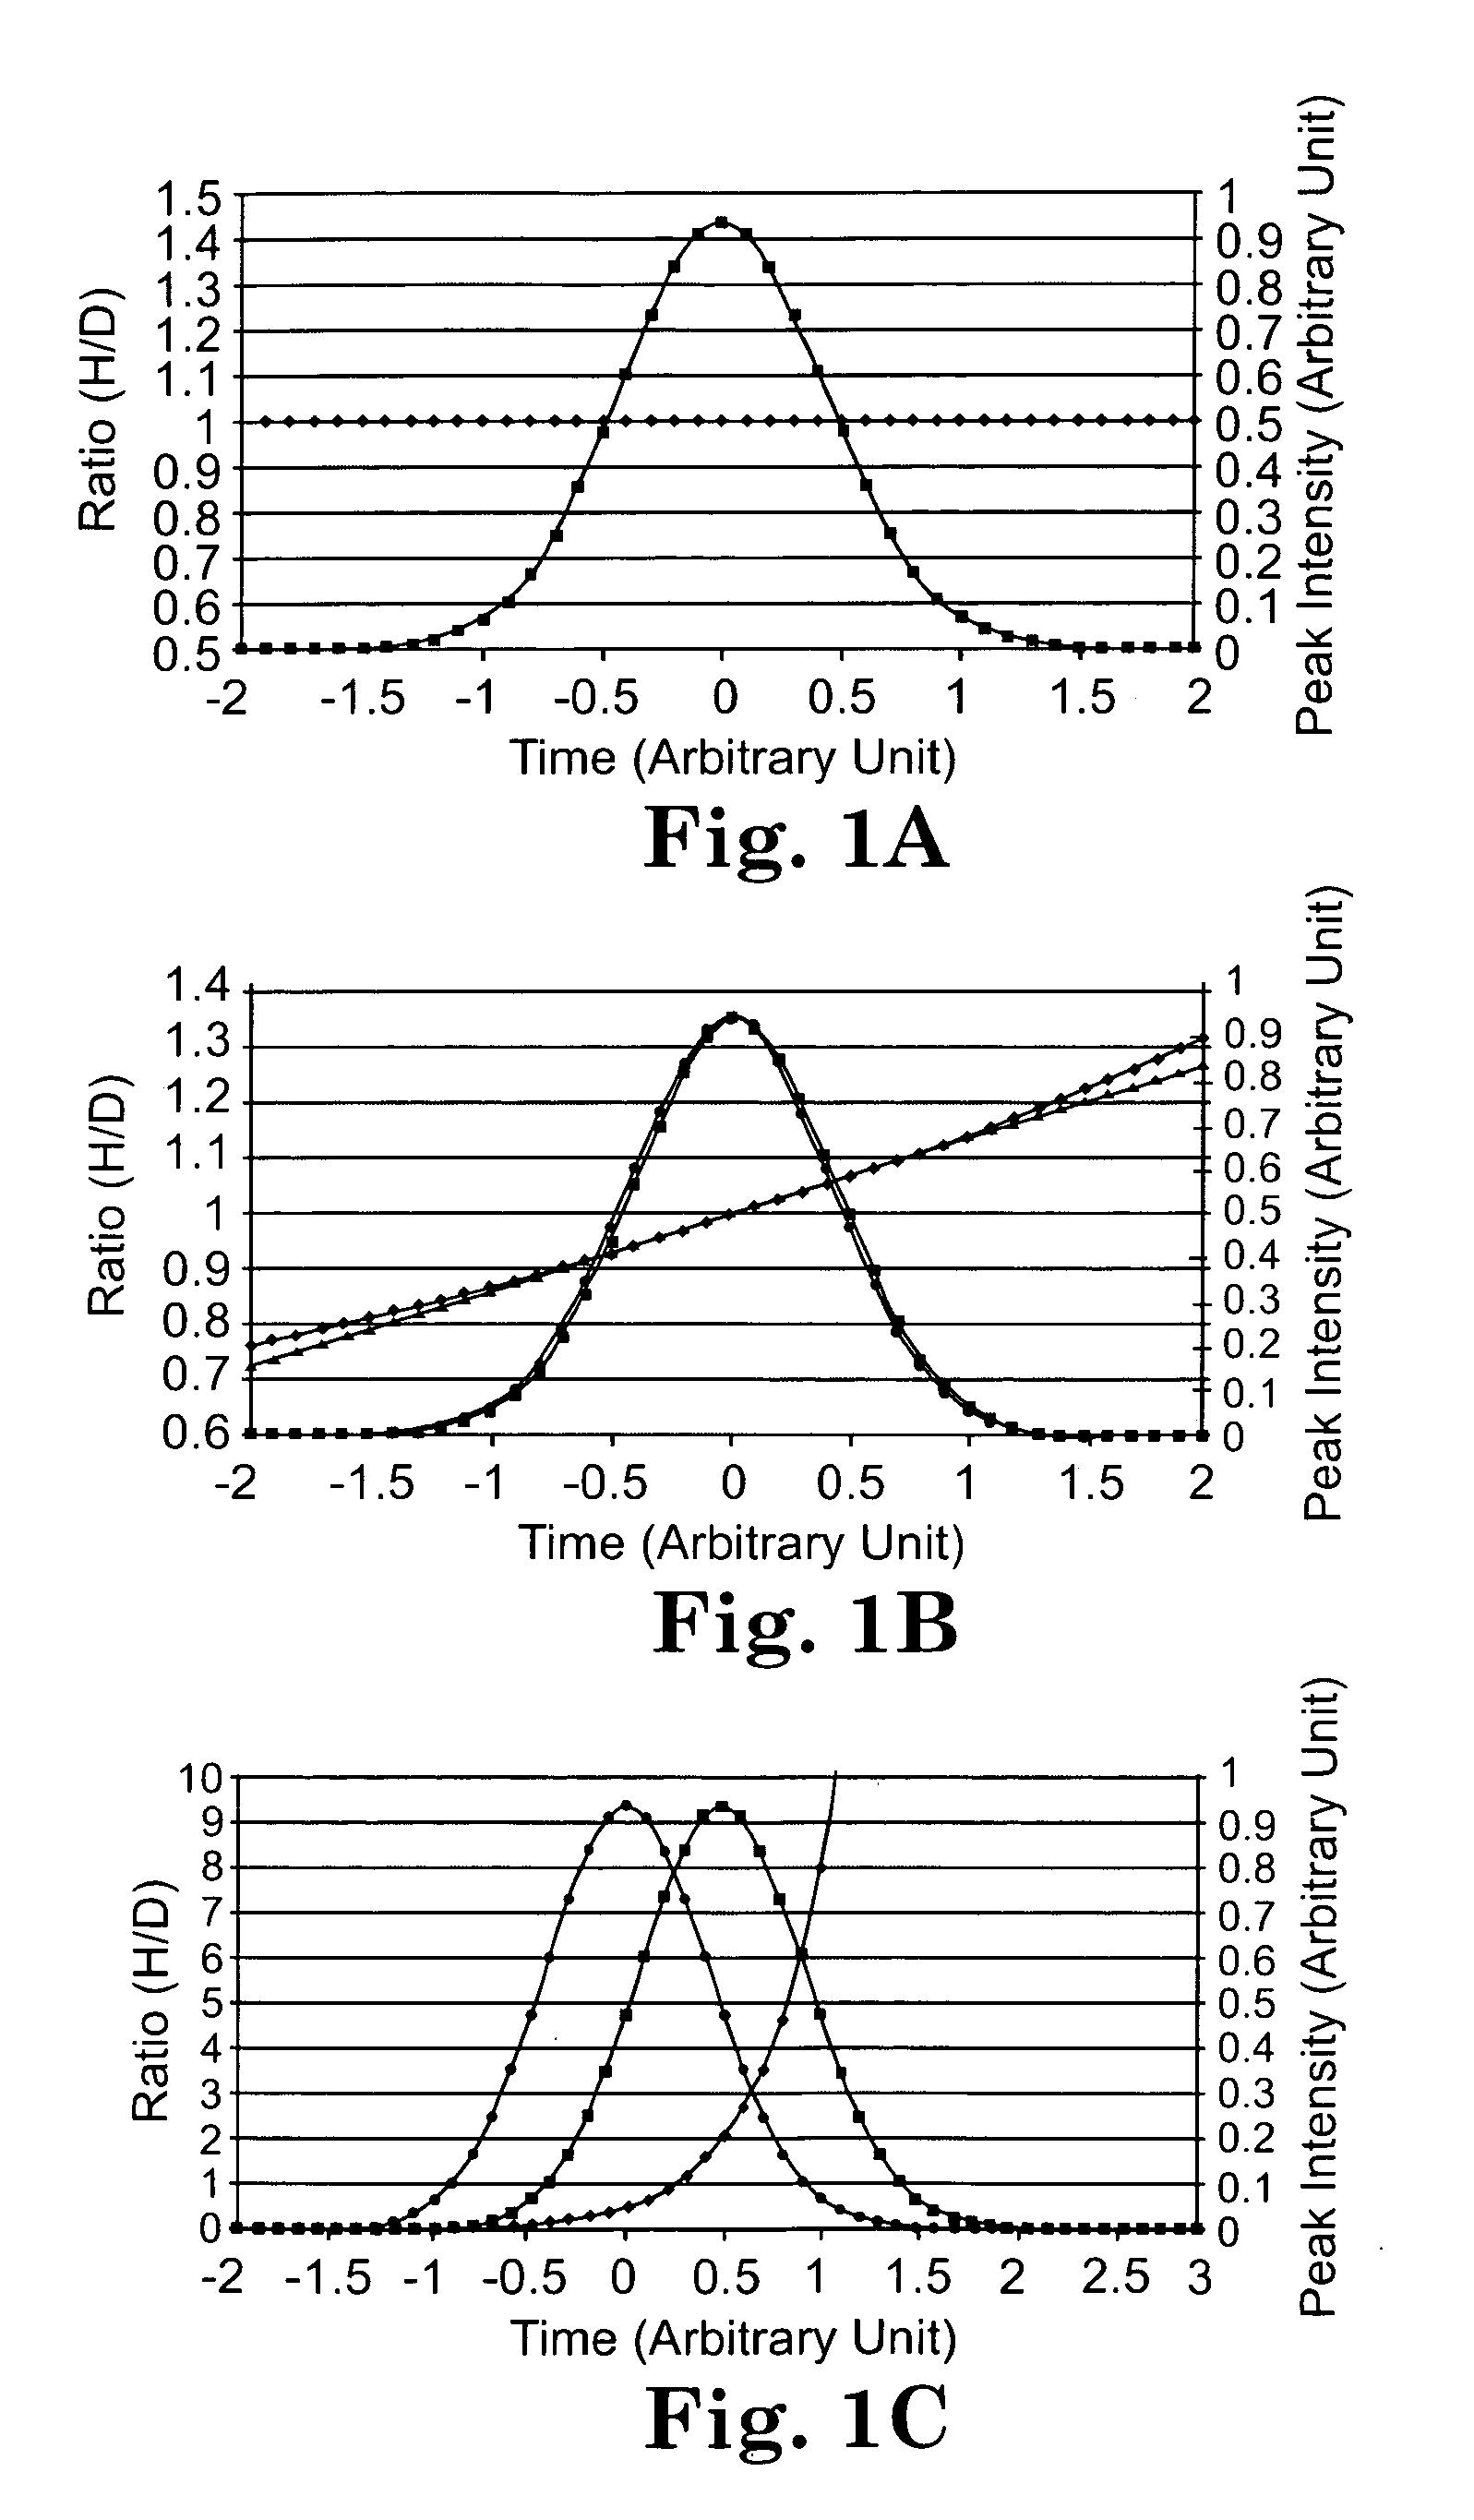 Materials and methods for controlling isotope effects during fractionation of analytes